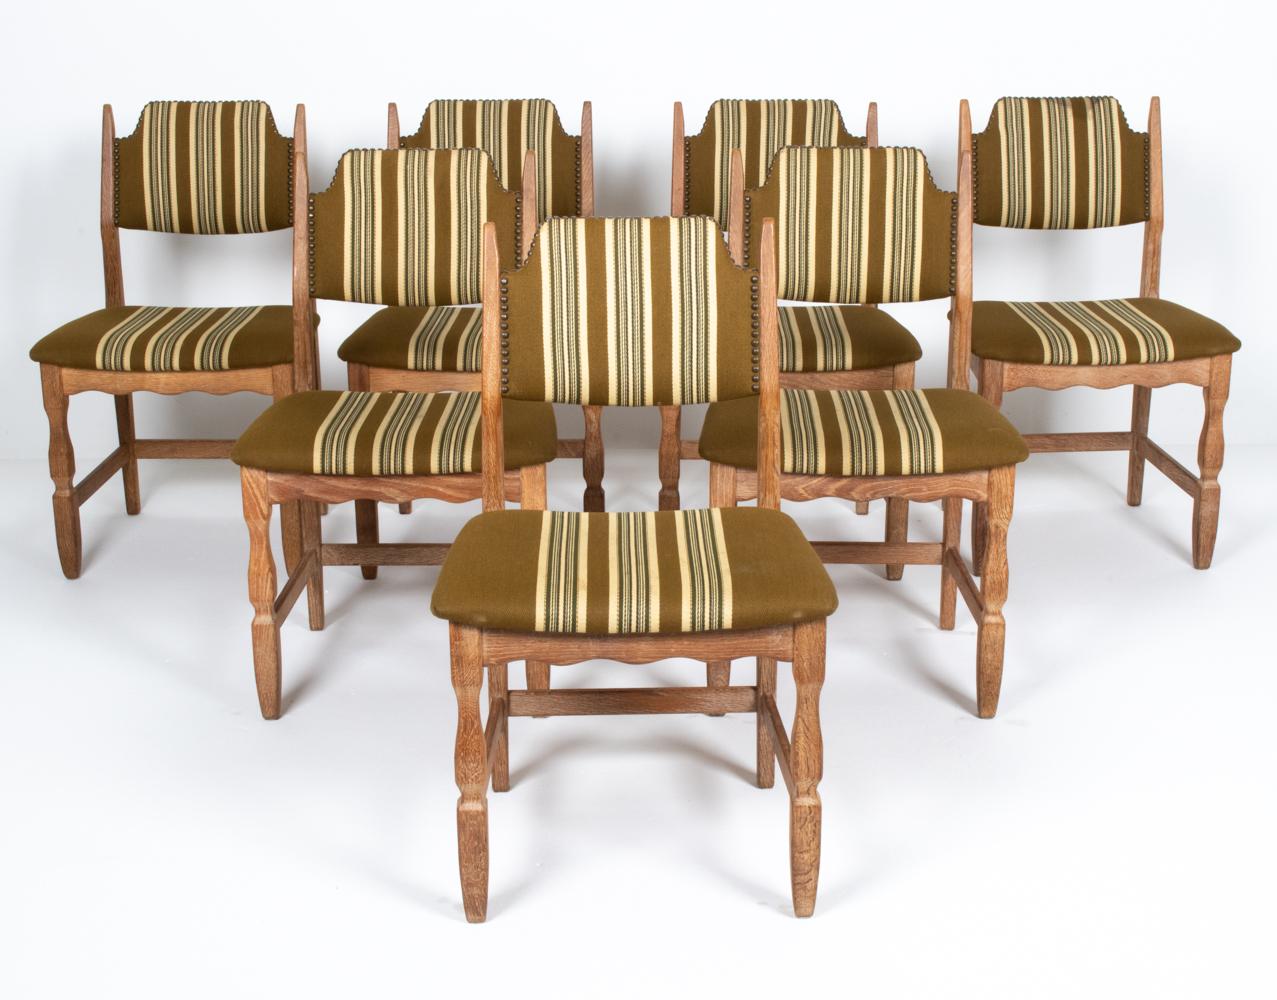 A set of seven Danish midcentury dining side chairs by designer Henning Kjaernulf, well-renowned for his iconic farmhouse-inspired carved oak furniture designs, c. 1960s. These charming Provincial chairs feature low sculpted backs, an upholstered